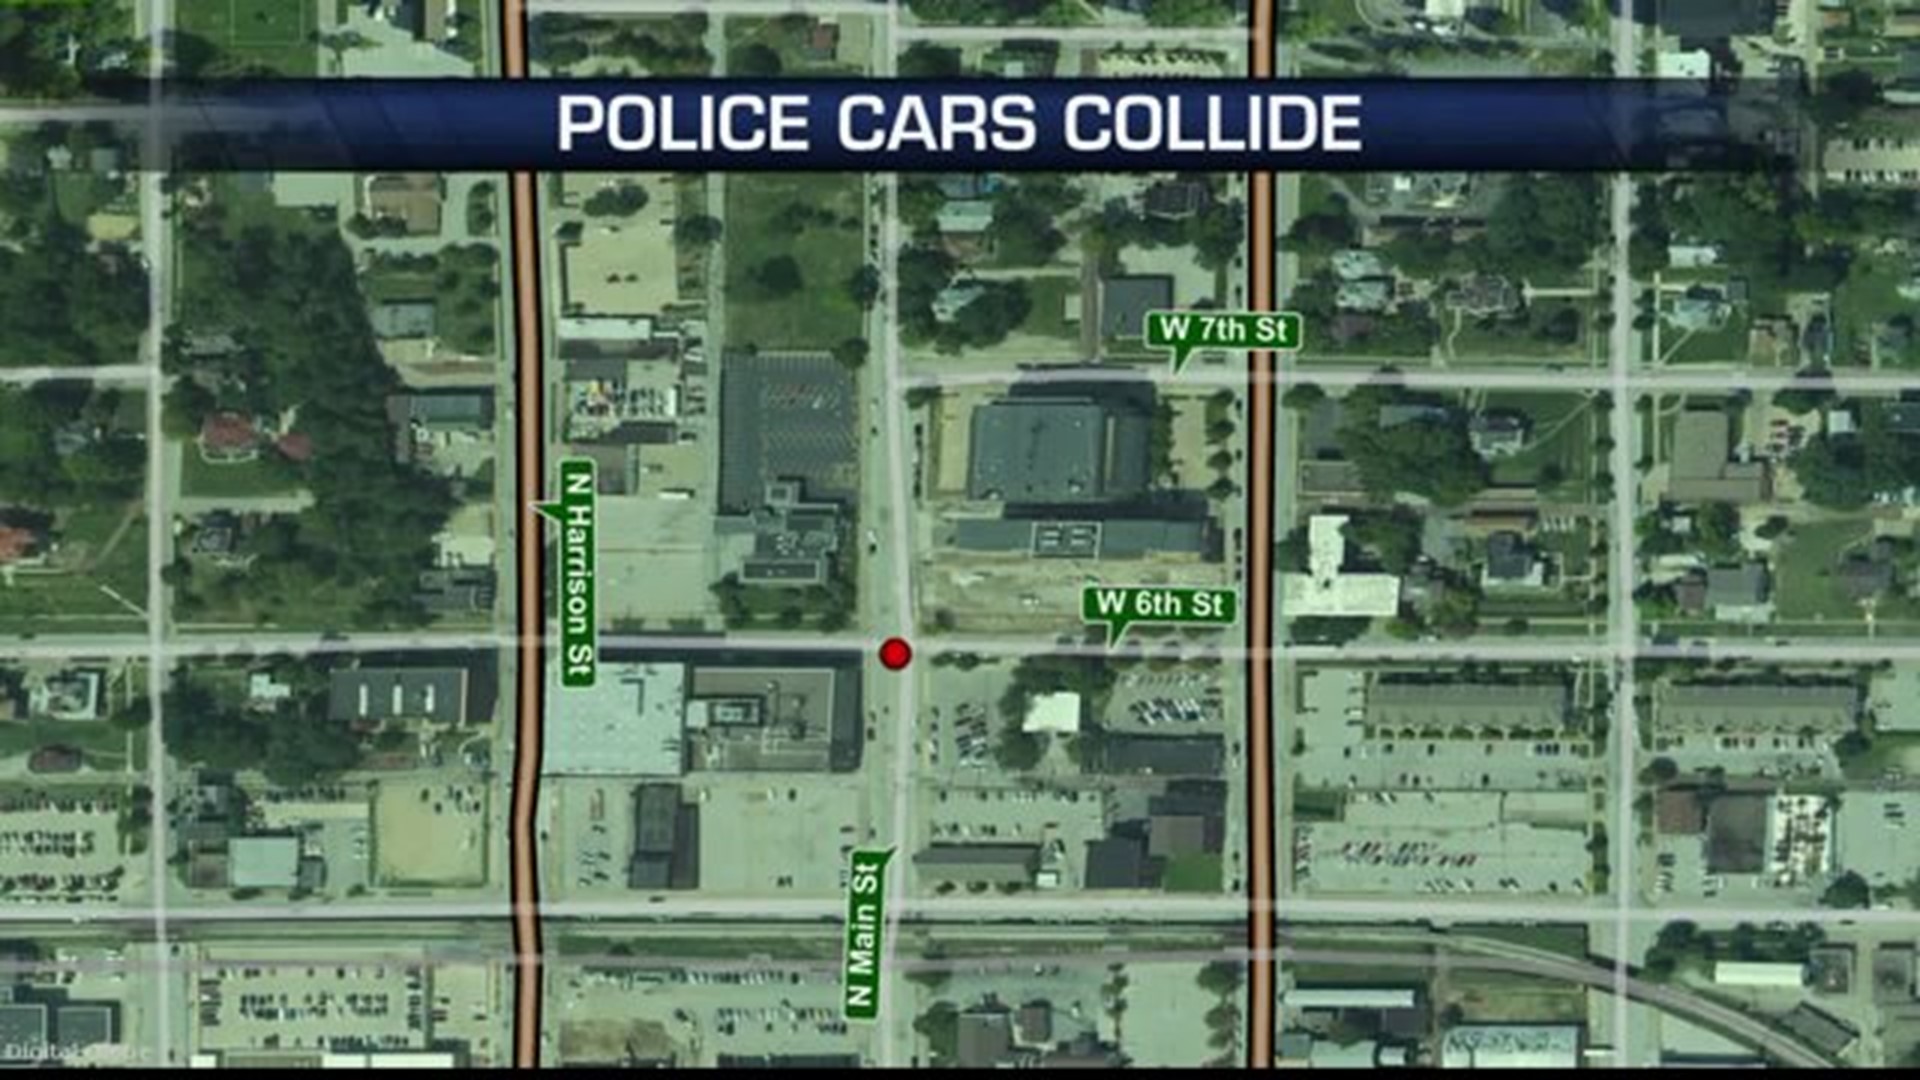 Police cars collide in Davenport